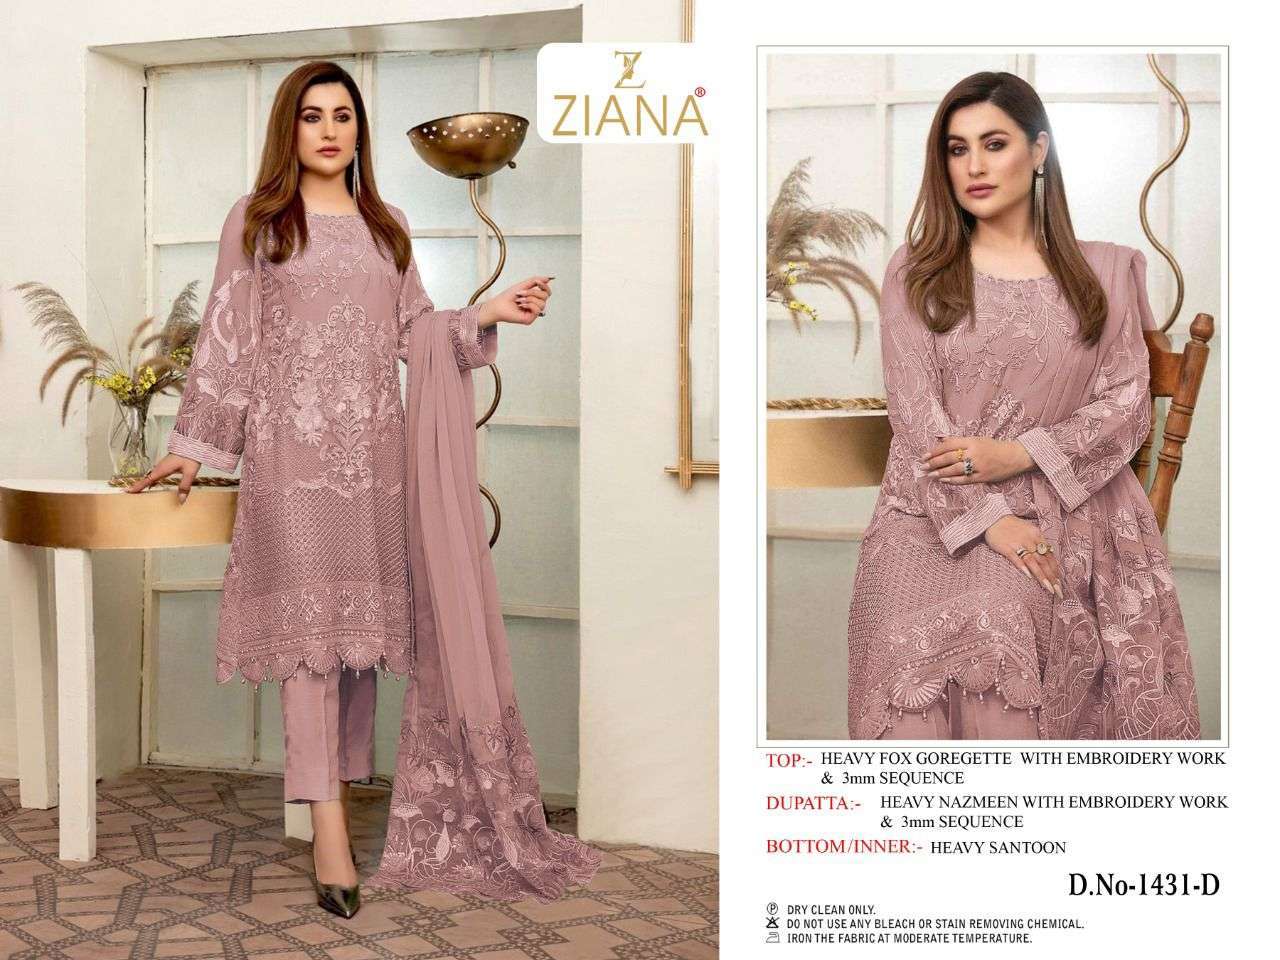 ziana 1431 design heavy faux georgette embroidery suit 